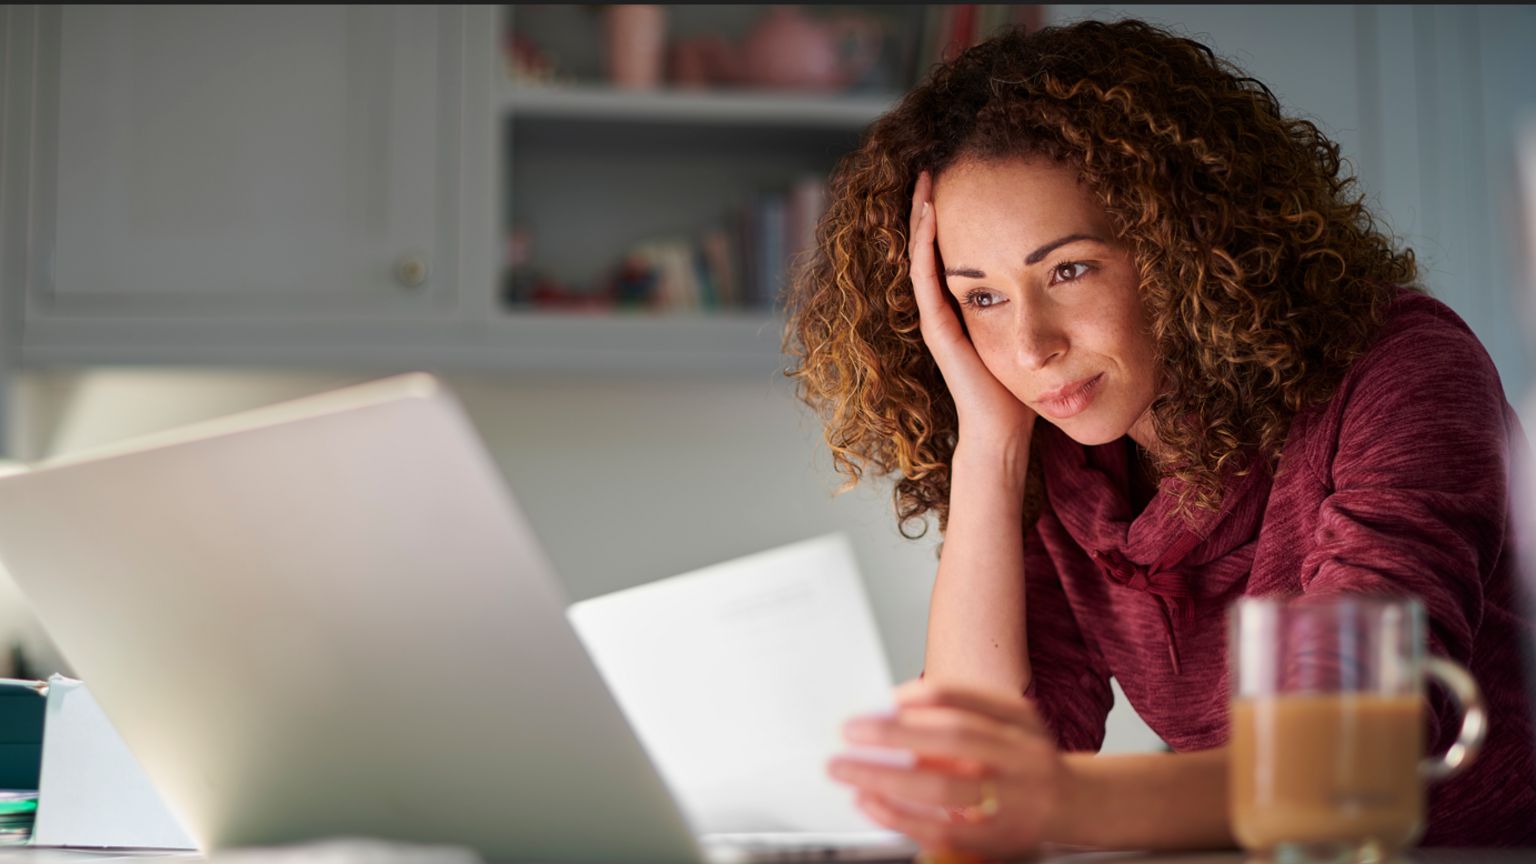 A woman looking frustrated by a computer